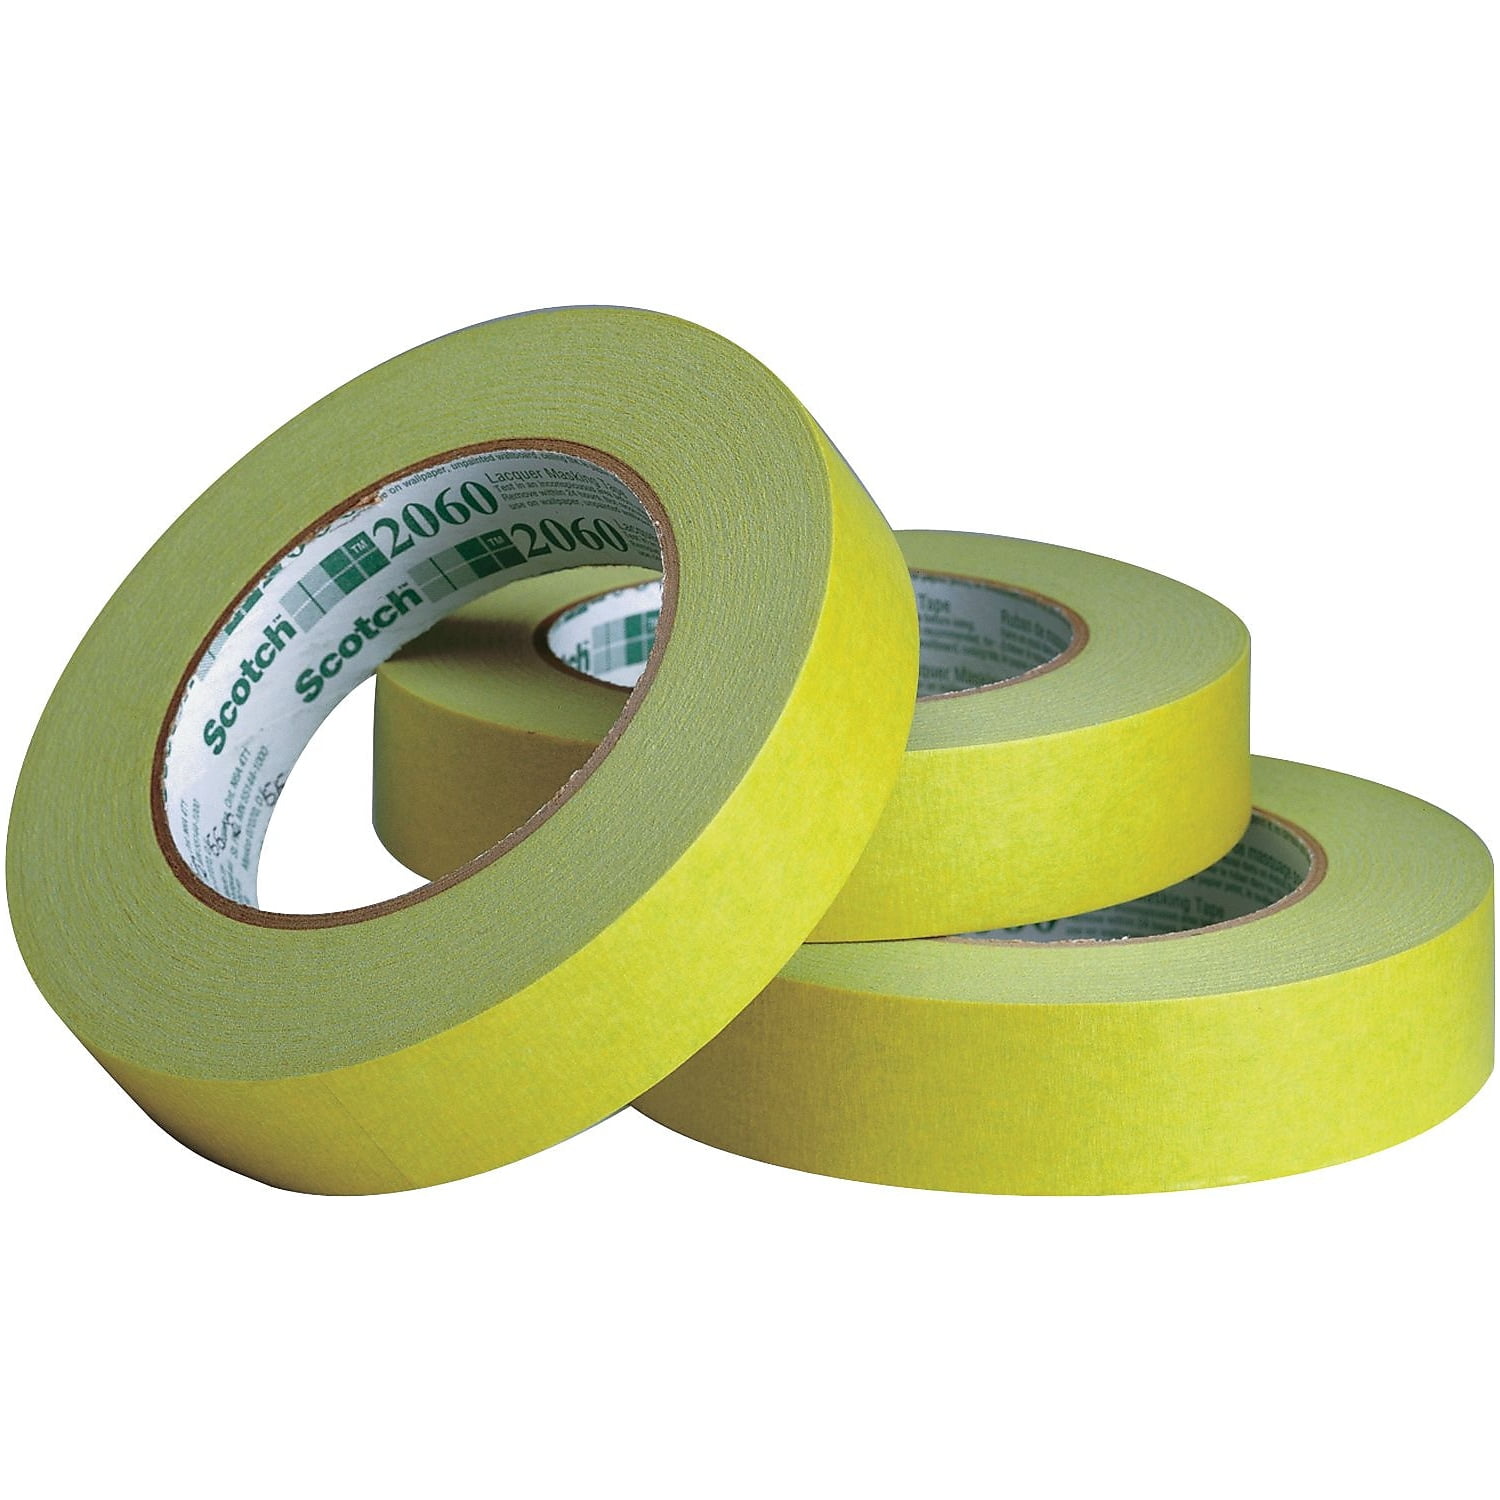 SCOTCH CORPORATION Scotch T935206012PK 1 in. x 60 yards 2060 Masking Tape, Green - Pack of 12